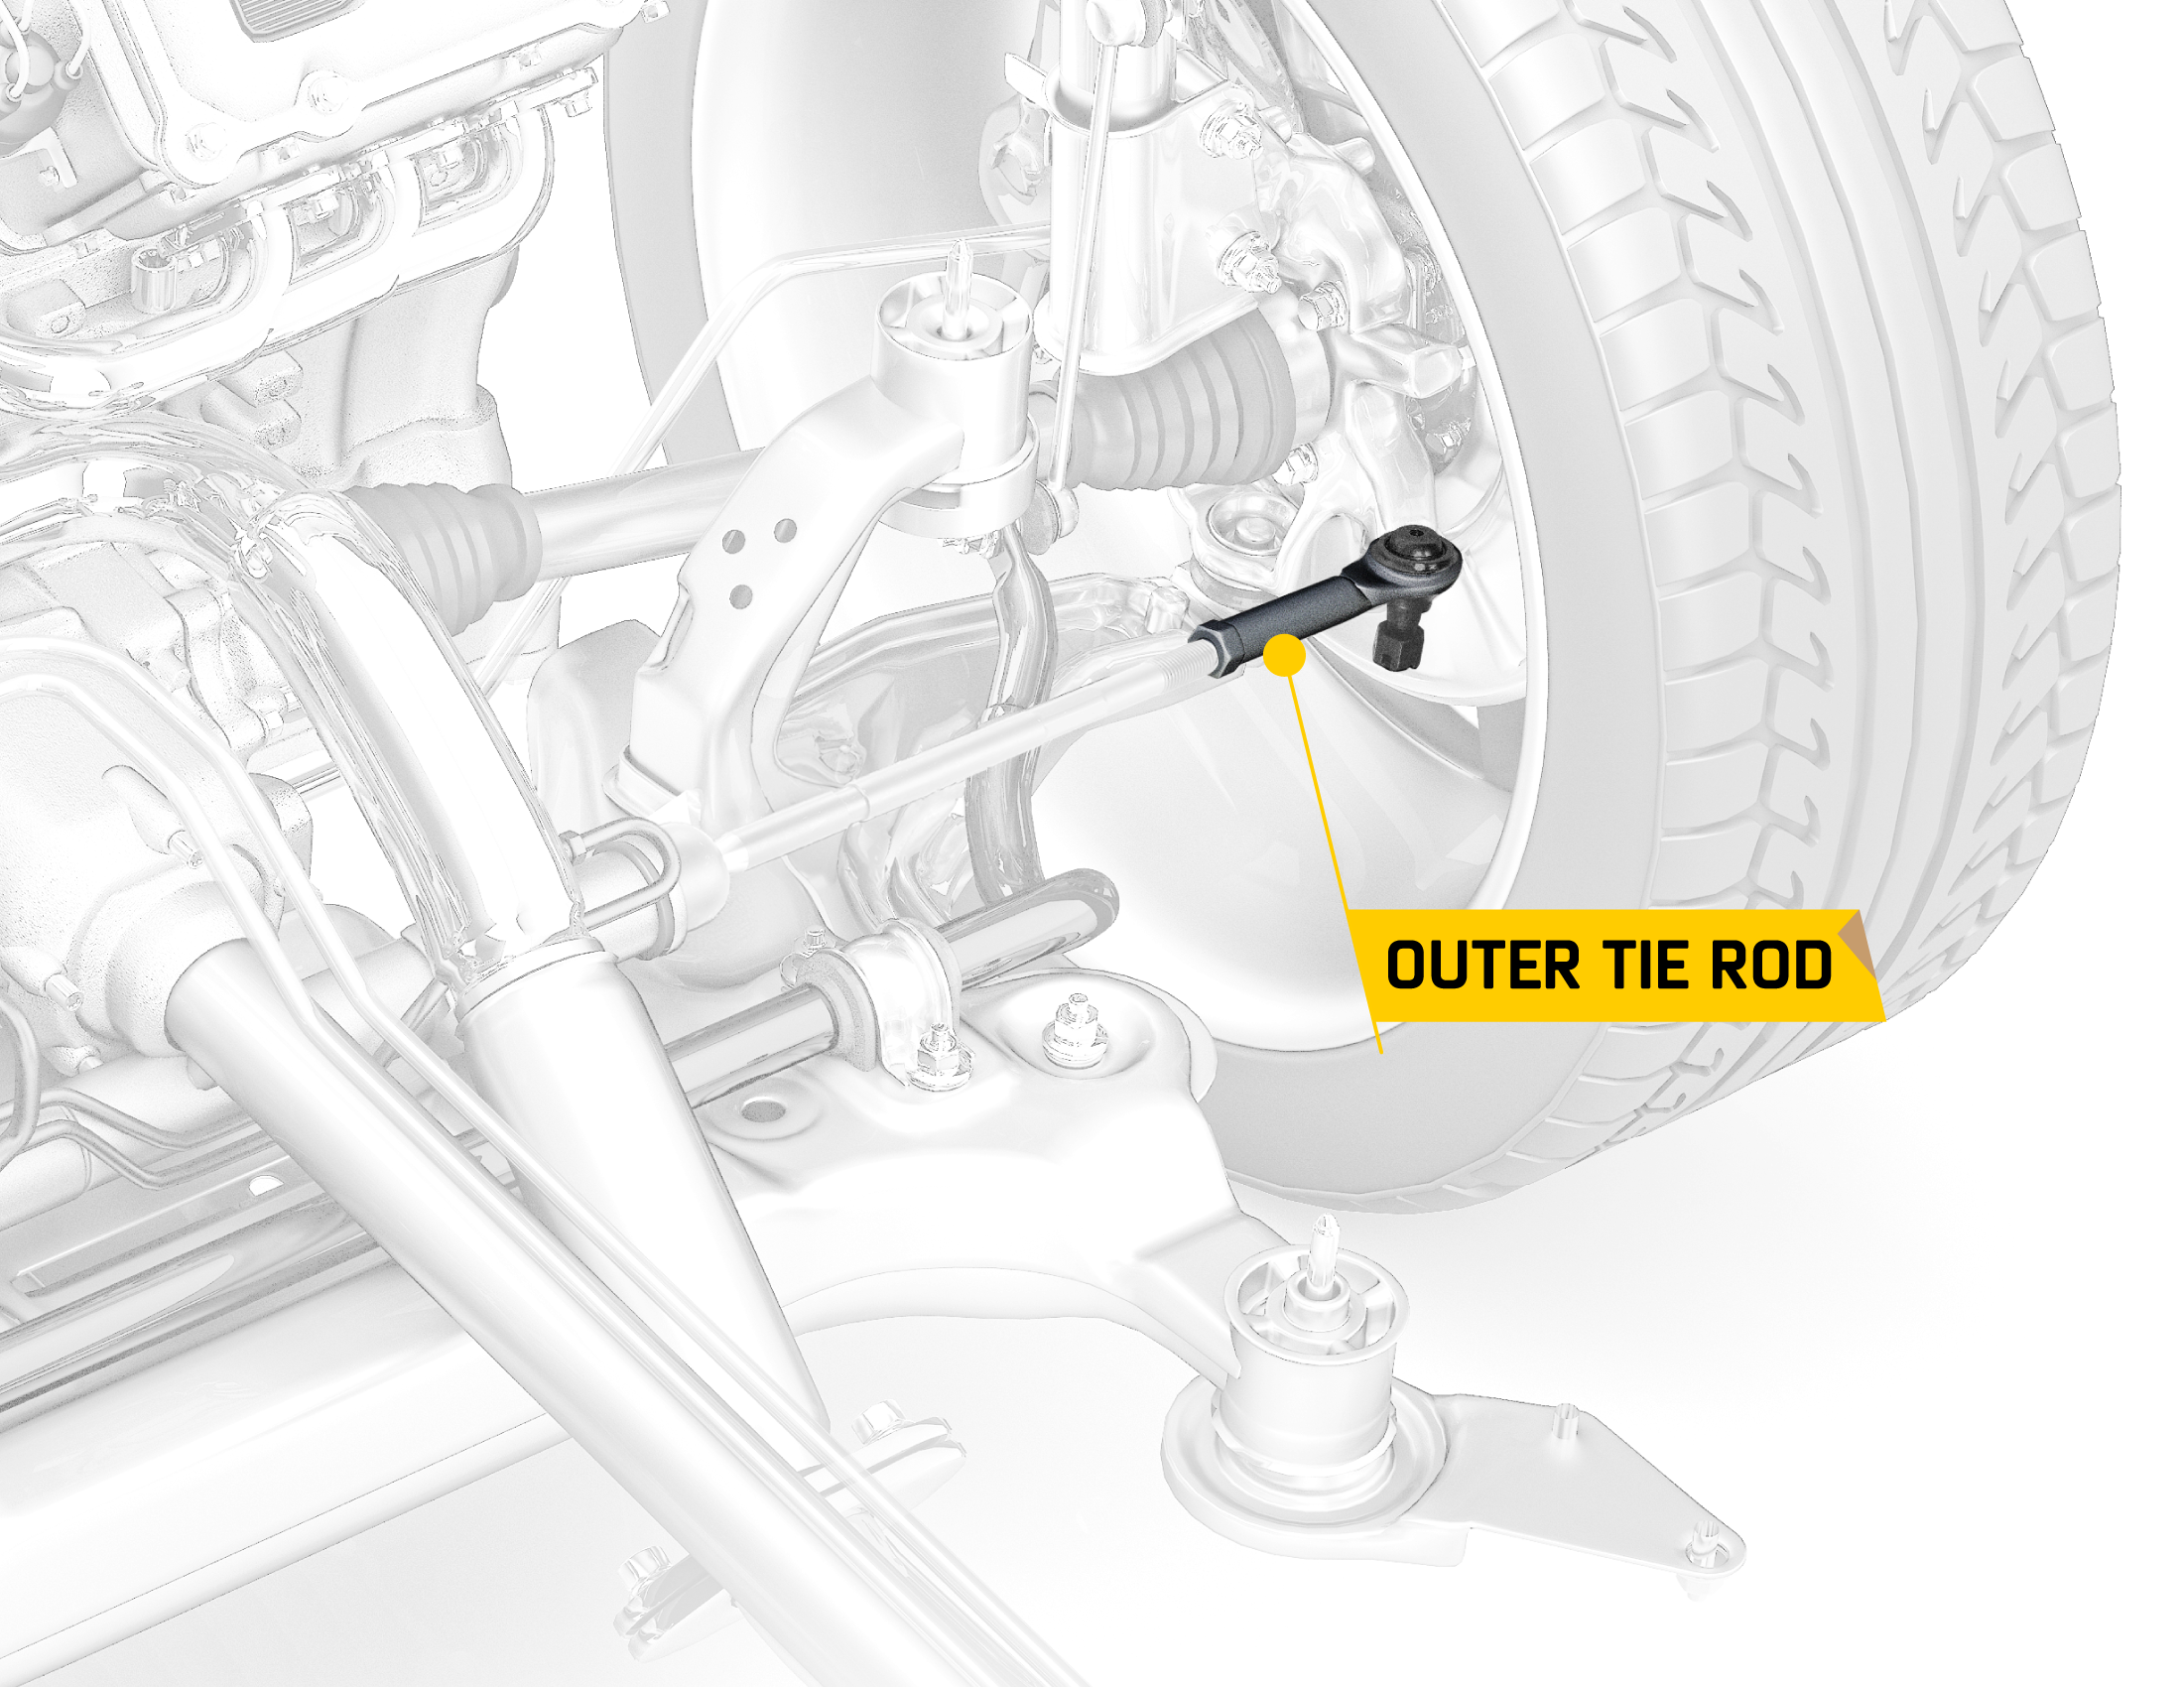 Installation position of out tie rod.